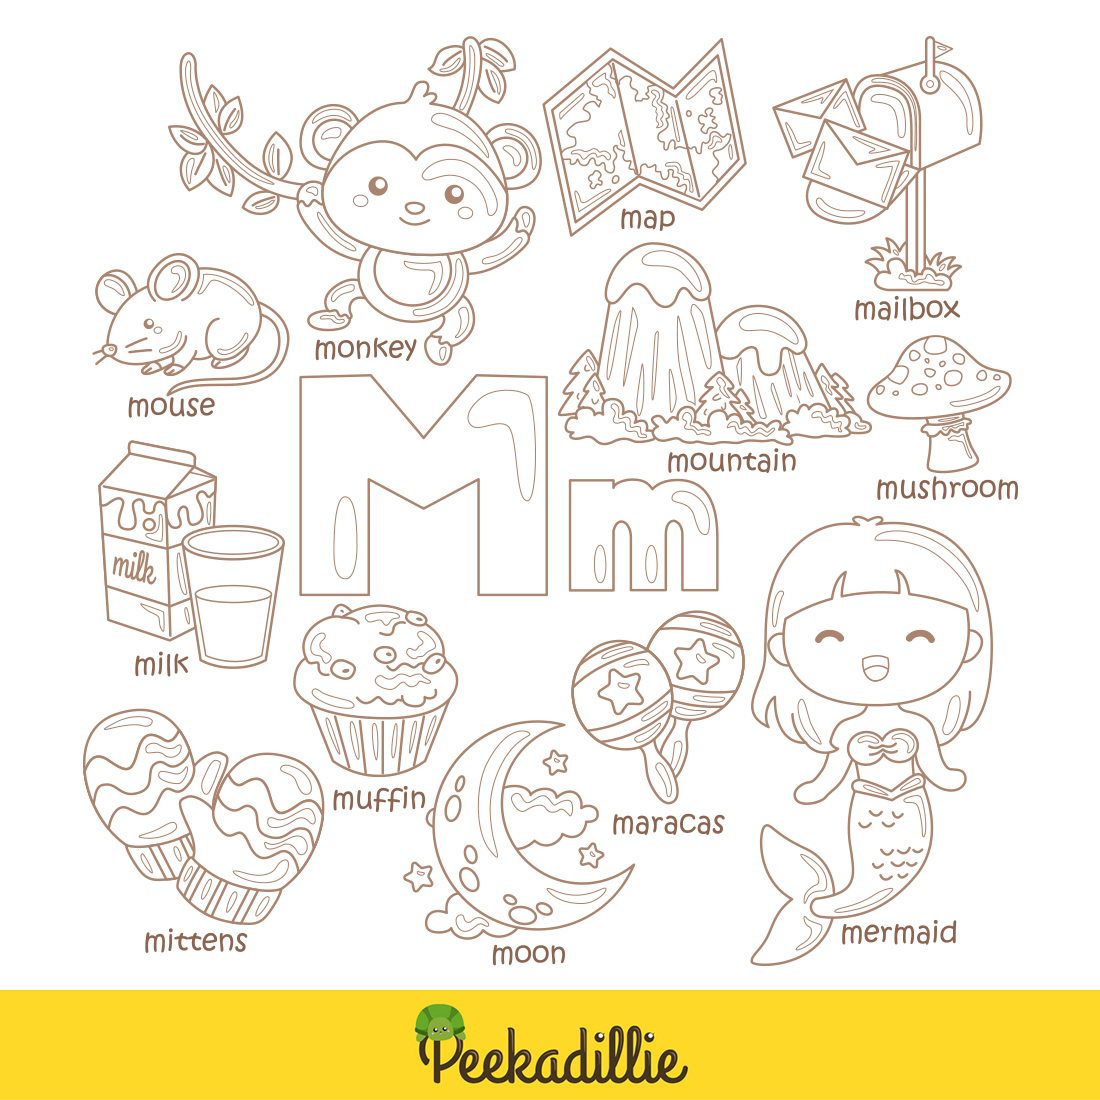 Alphabet M For Vocabulary School Letter Reading Writing Font Study Learning Student Toodler Kids Cartoon Mouse Monkey Mermaid Mountain Milk Mushroom Mittens Mailbox Moon Maracas Muffin Map Digital Stamp Outline Black and White preview image.